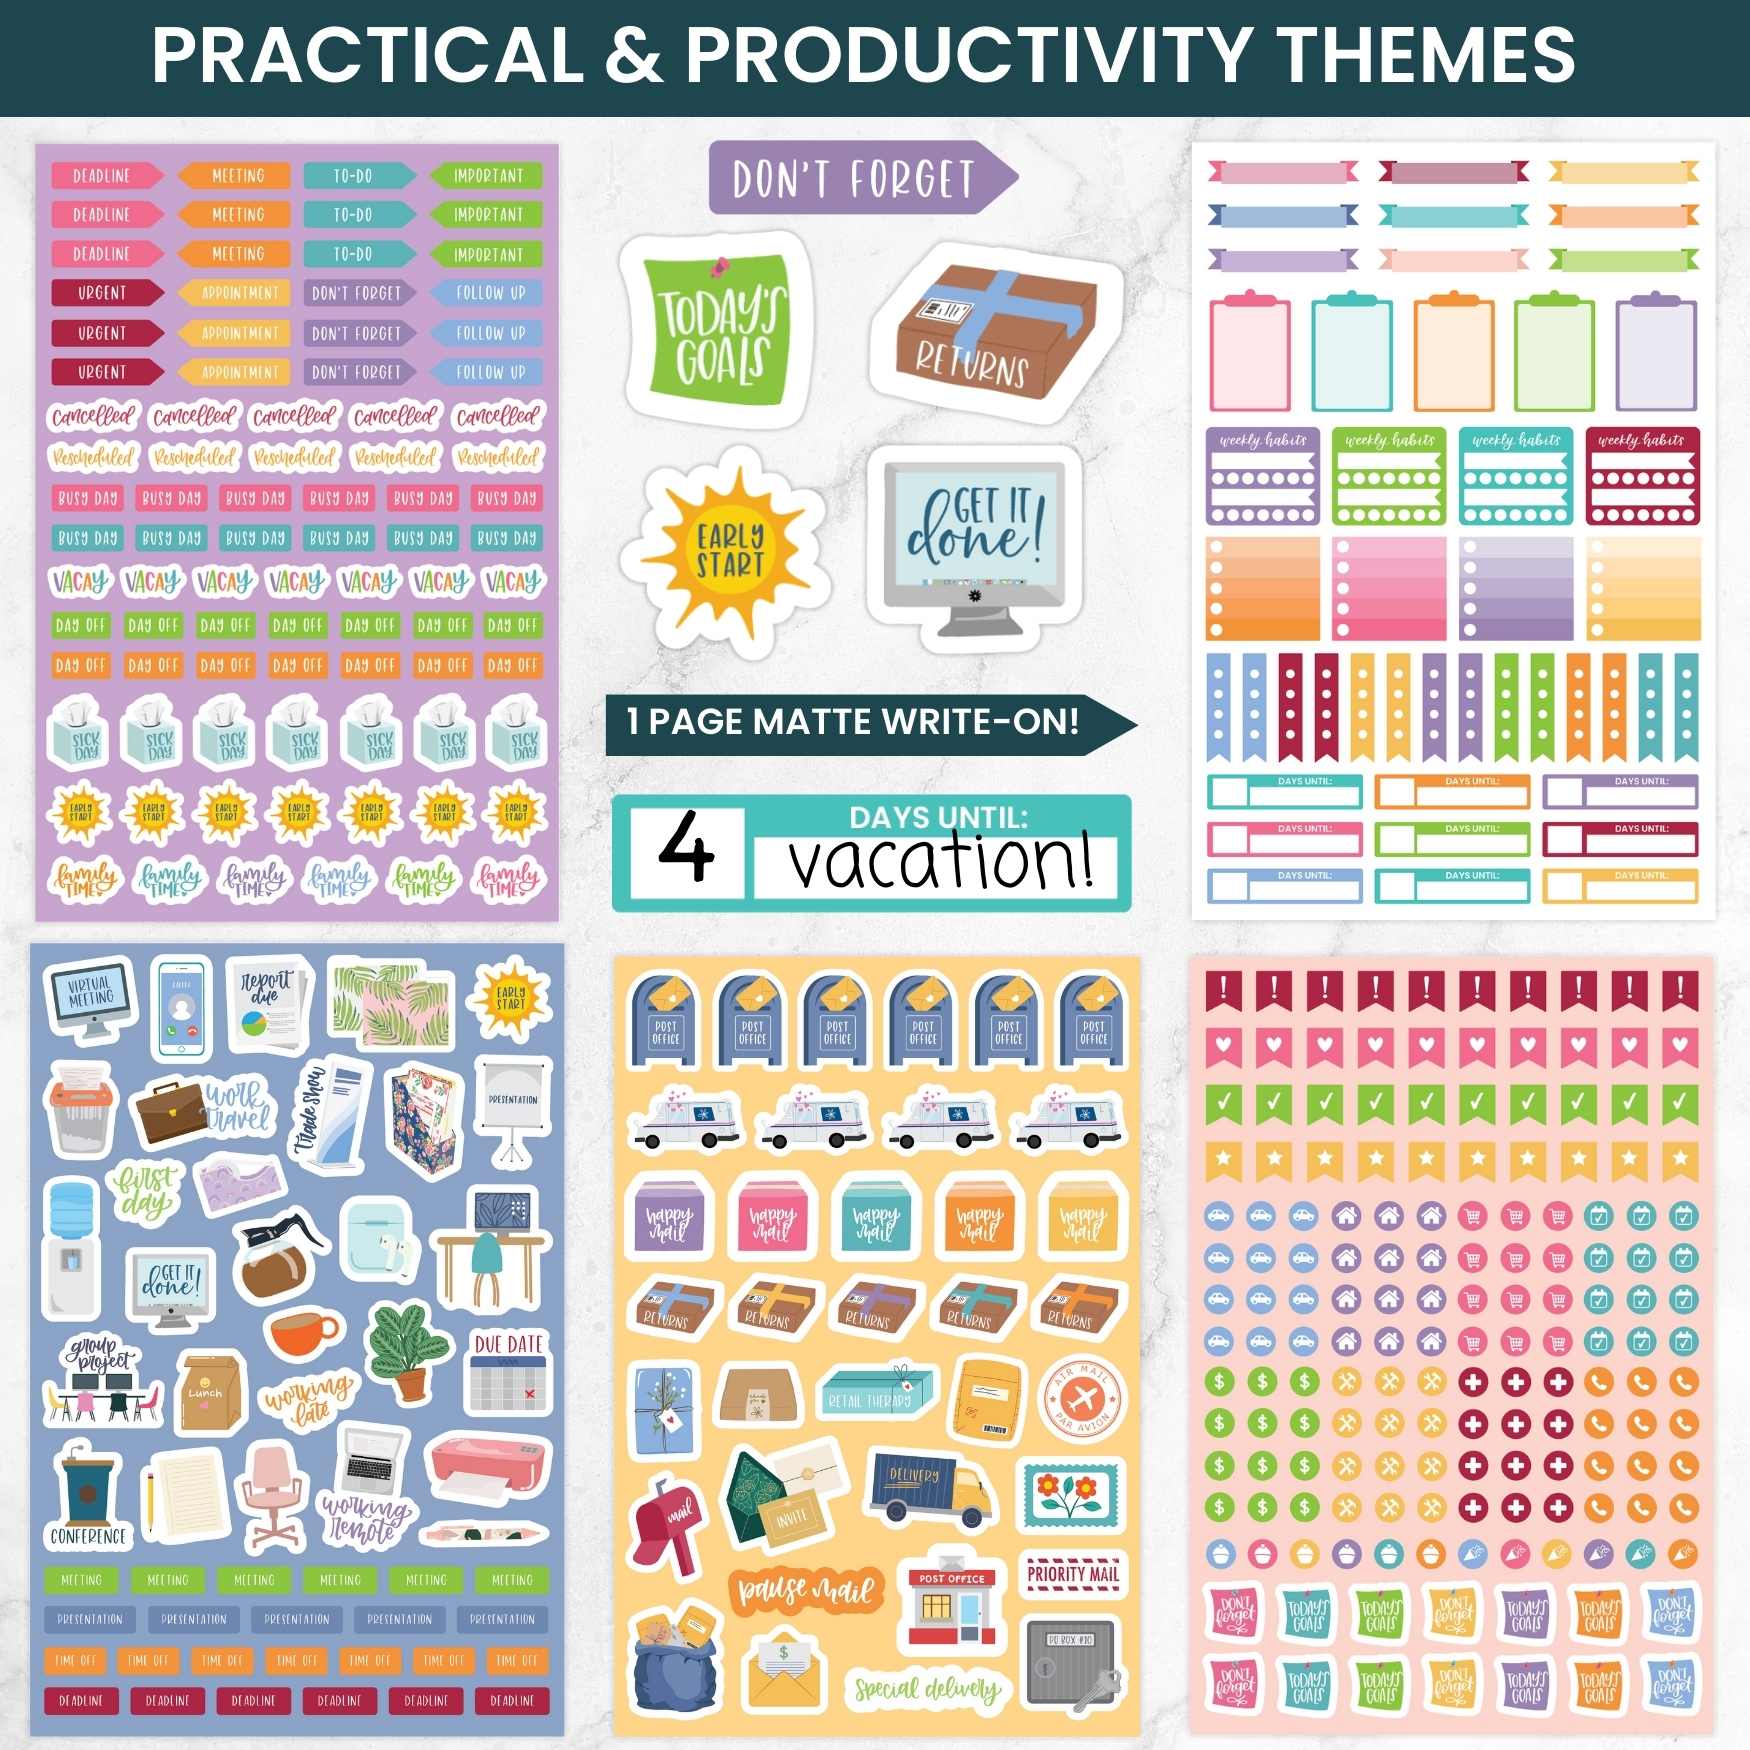 Bloom Daily Planners 40 Page Sticker Book - Stickers Make Everything Better